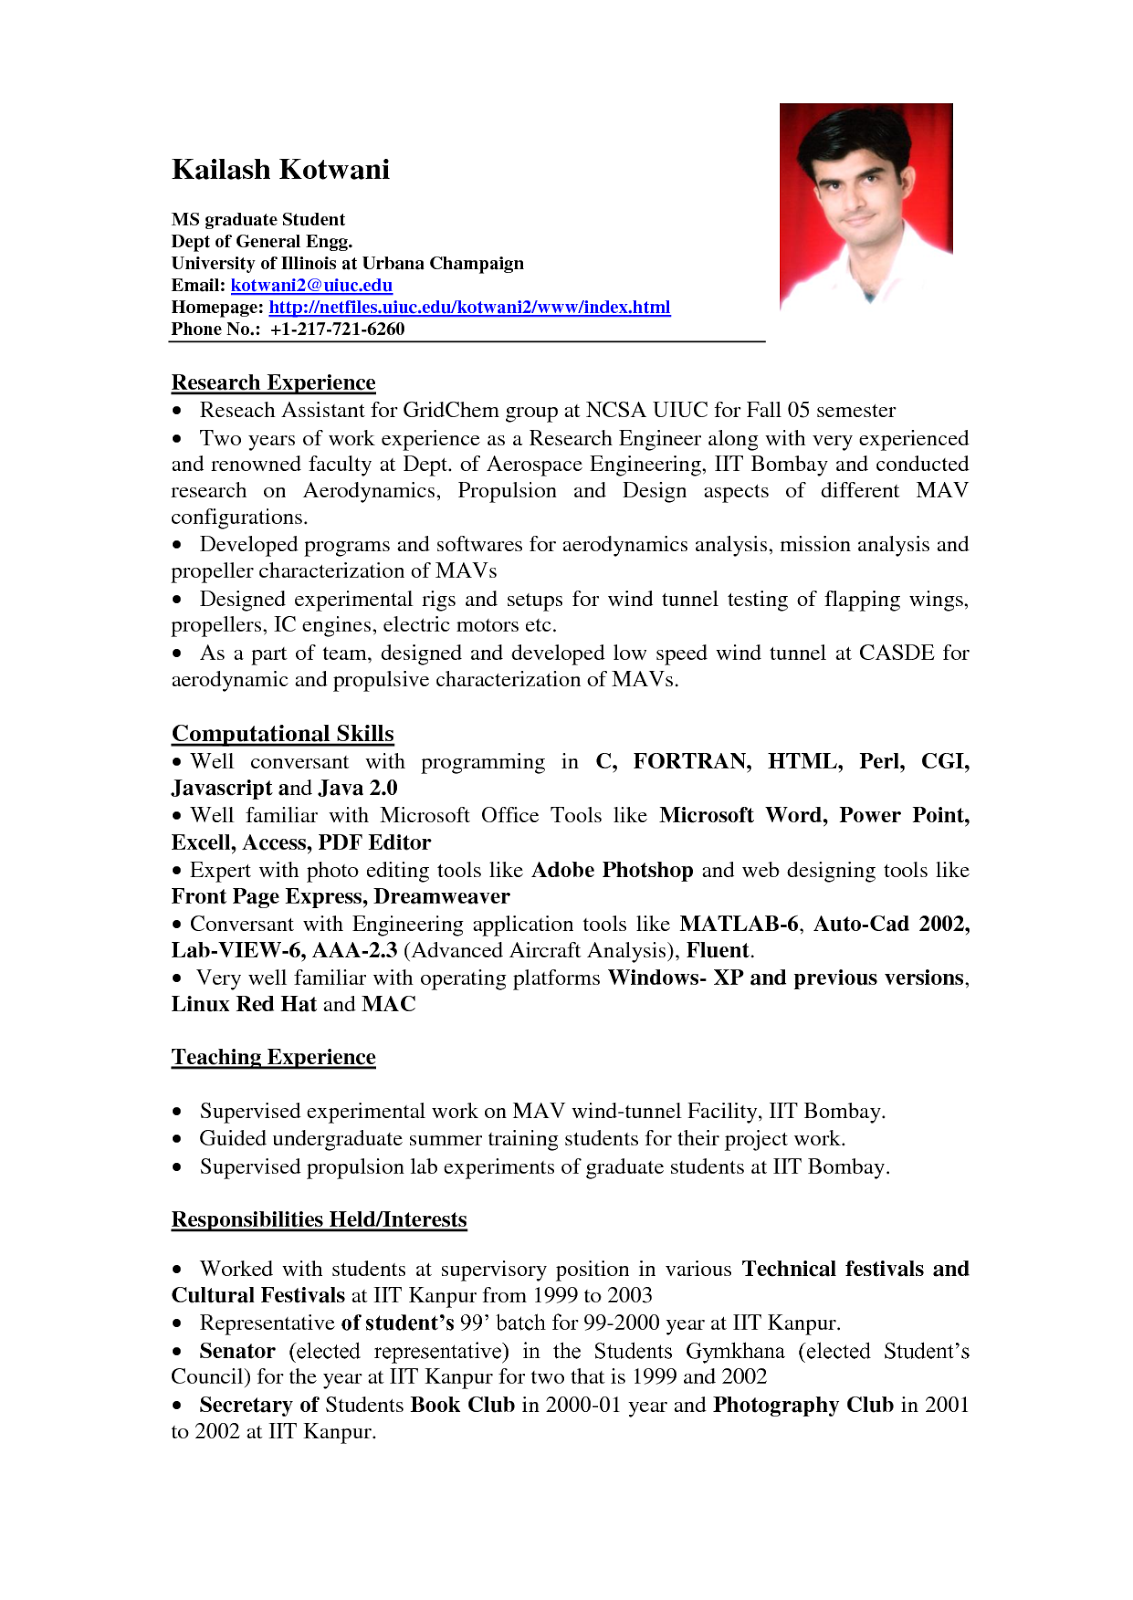 Resume Sample for Students With No Experience | Sample Resumes